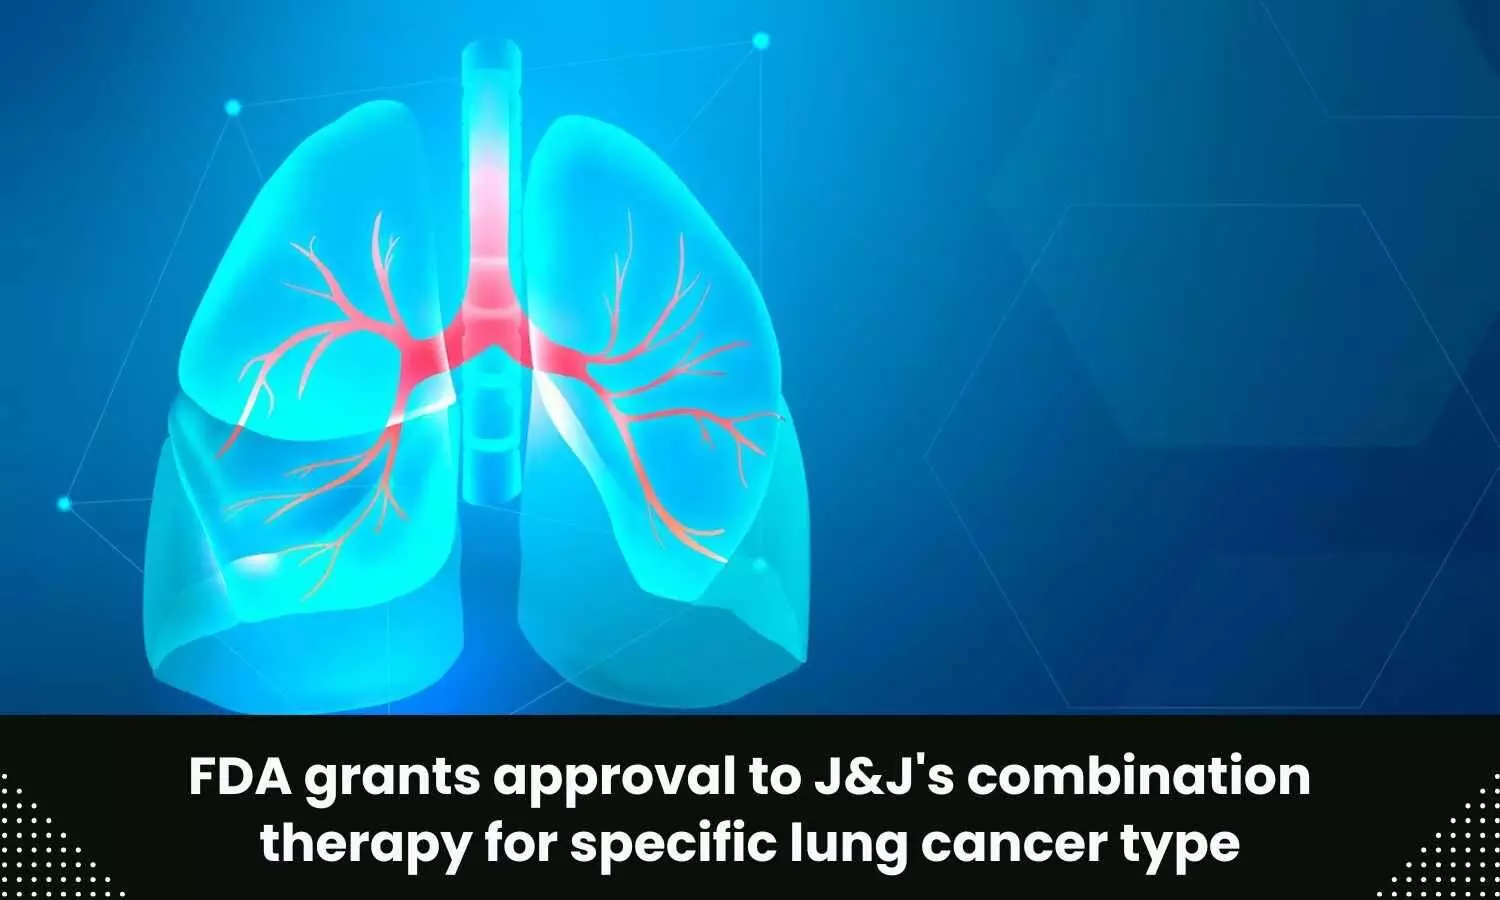 USFDA nod to JnJ for Rybrevant, Chemotherapy combo for lung cancer treatment